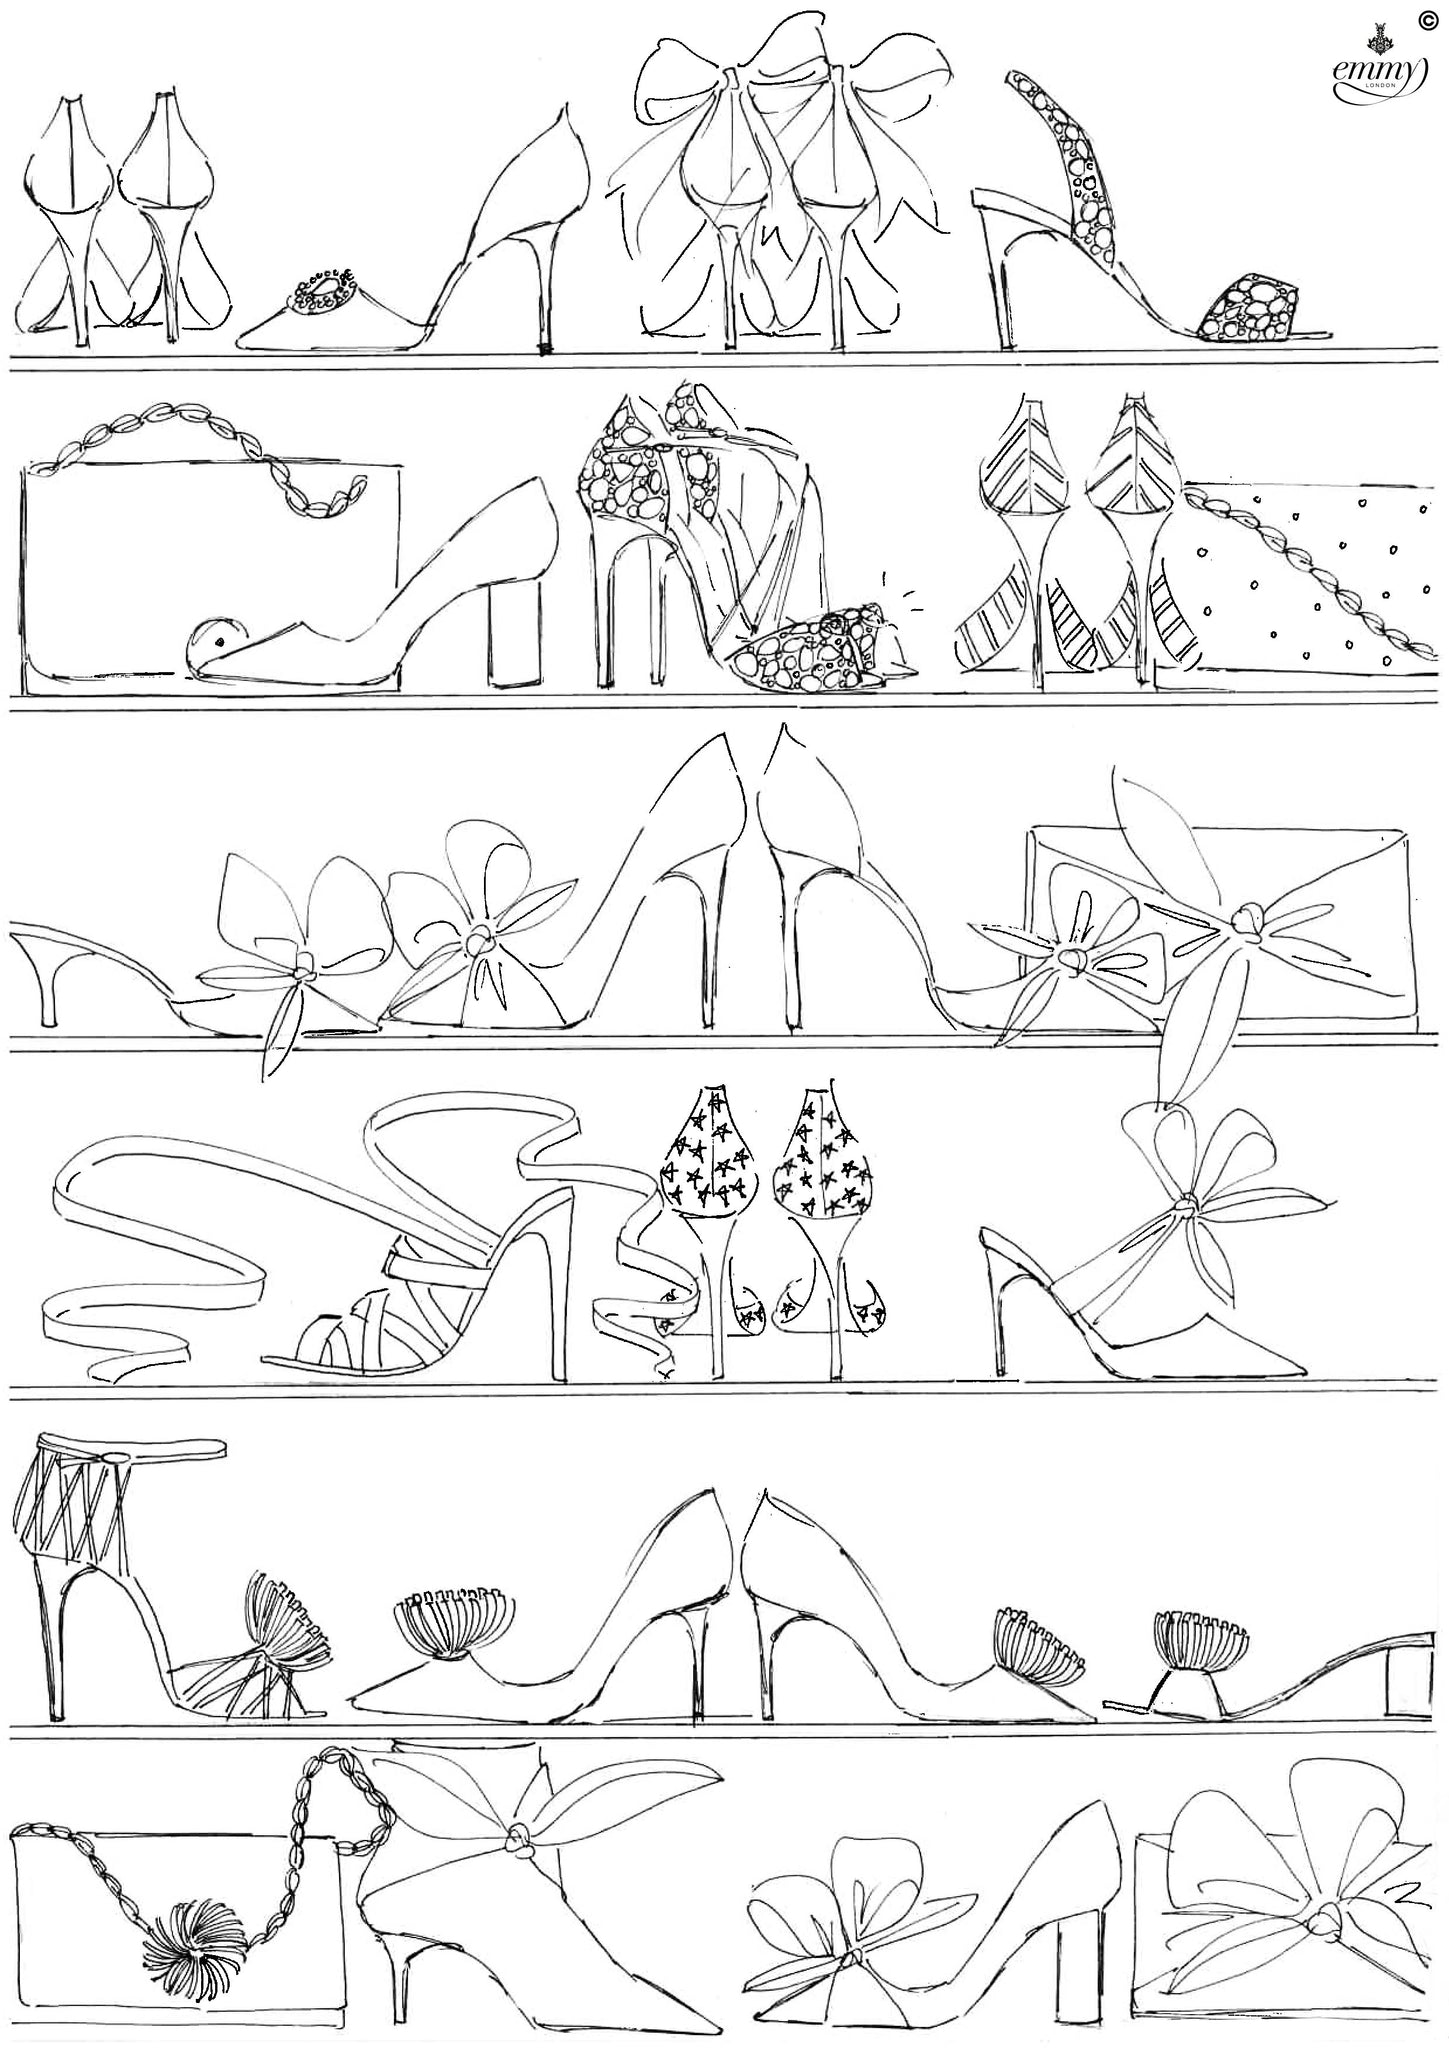 Wardrobe of Shoes Colouring Page by Emmy London